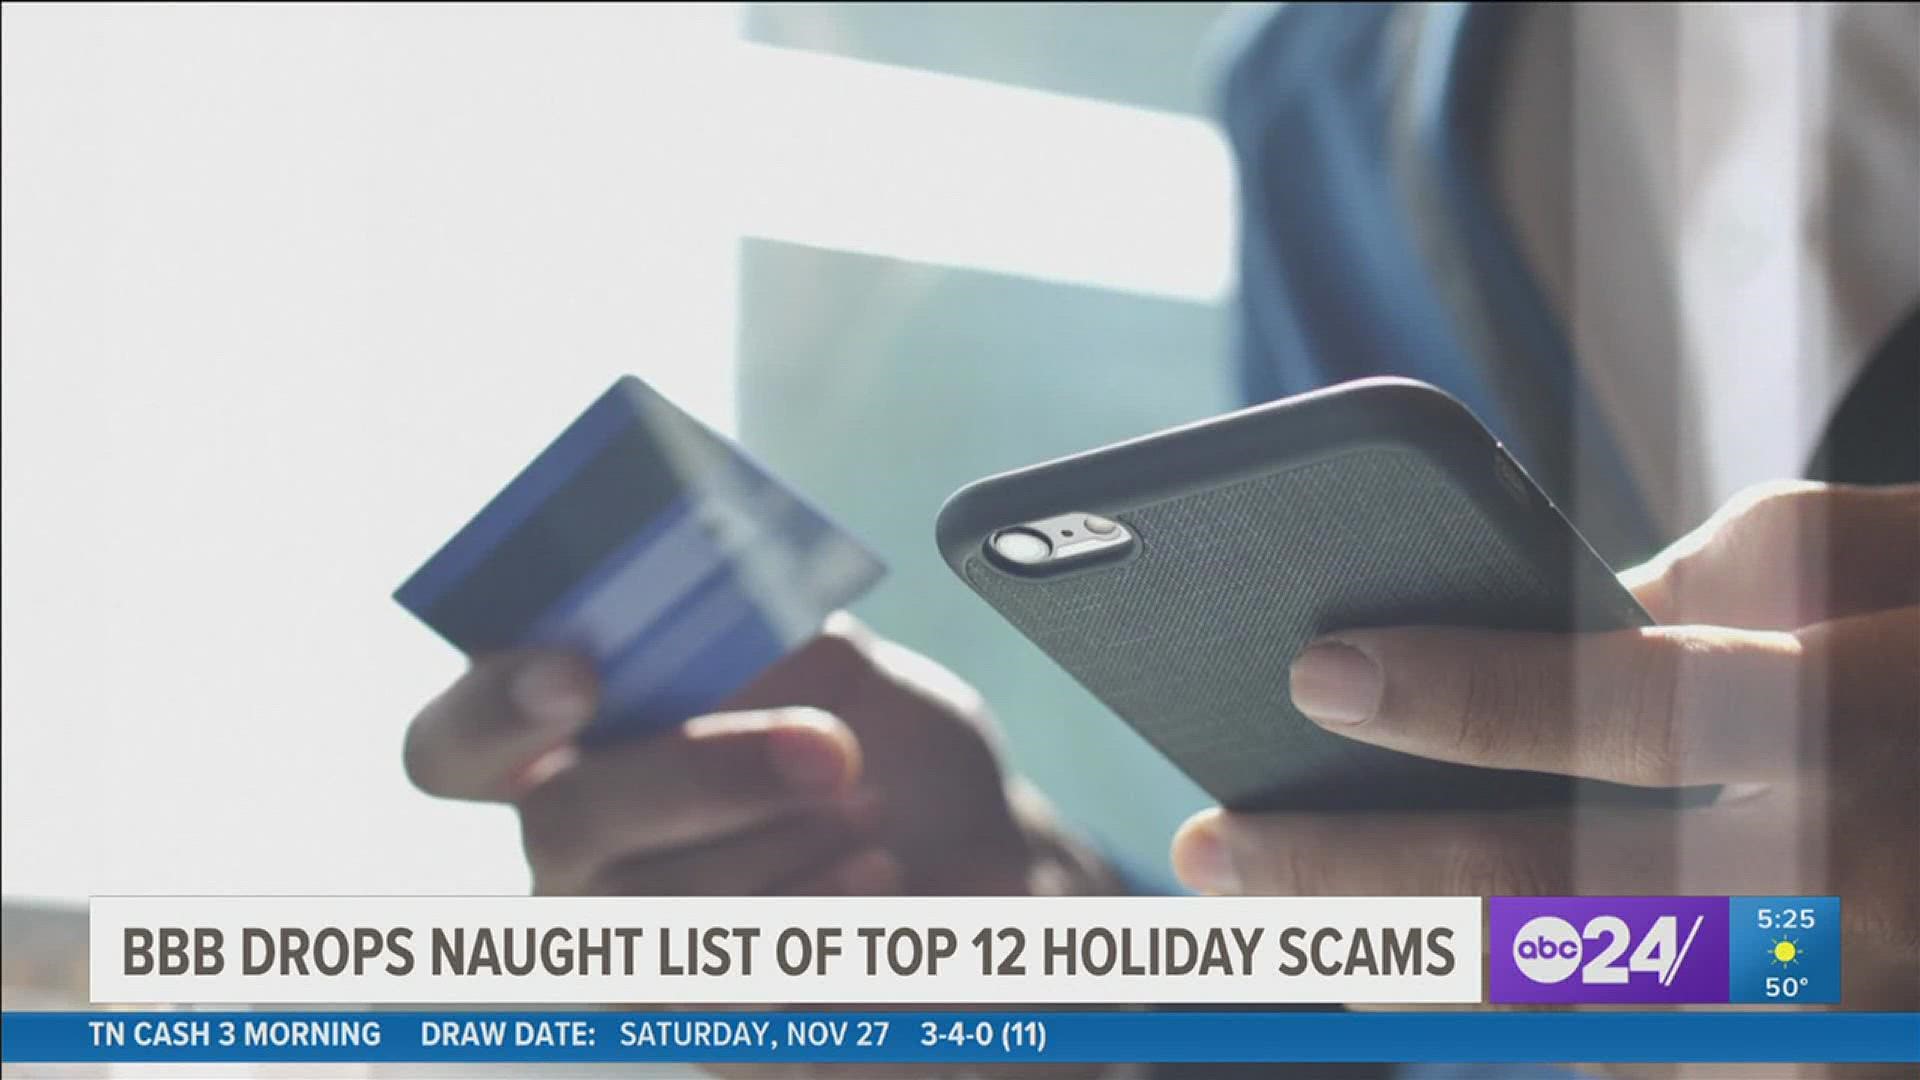 The BBB is giving us a Naughty List with the top 12 scams of Christmas that are most likely to catch you off guard shopping for those holiday gifts.